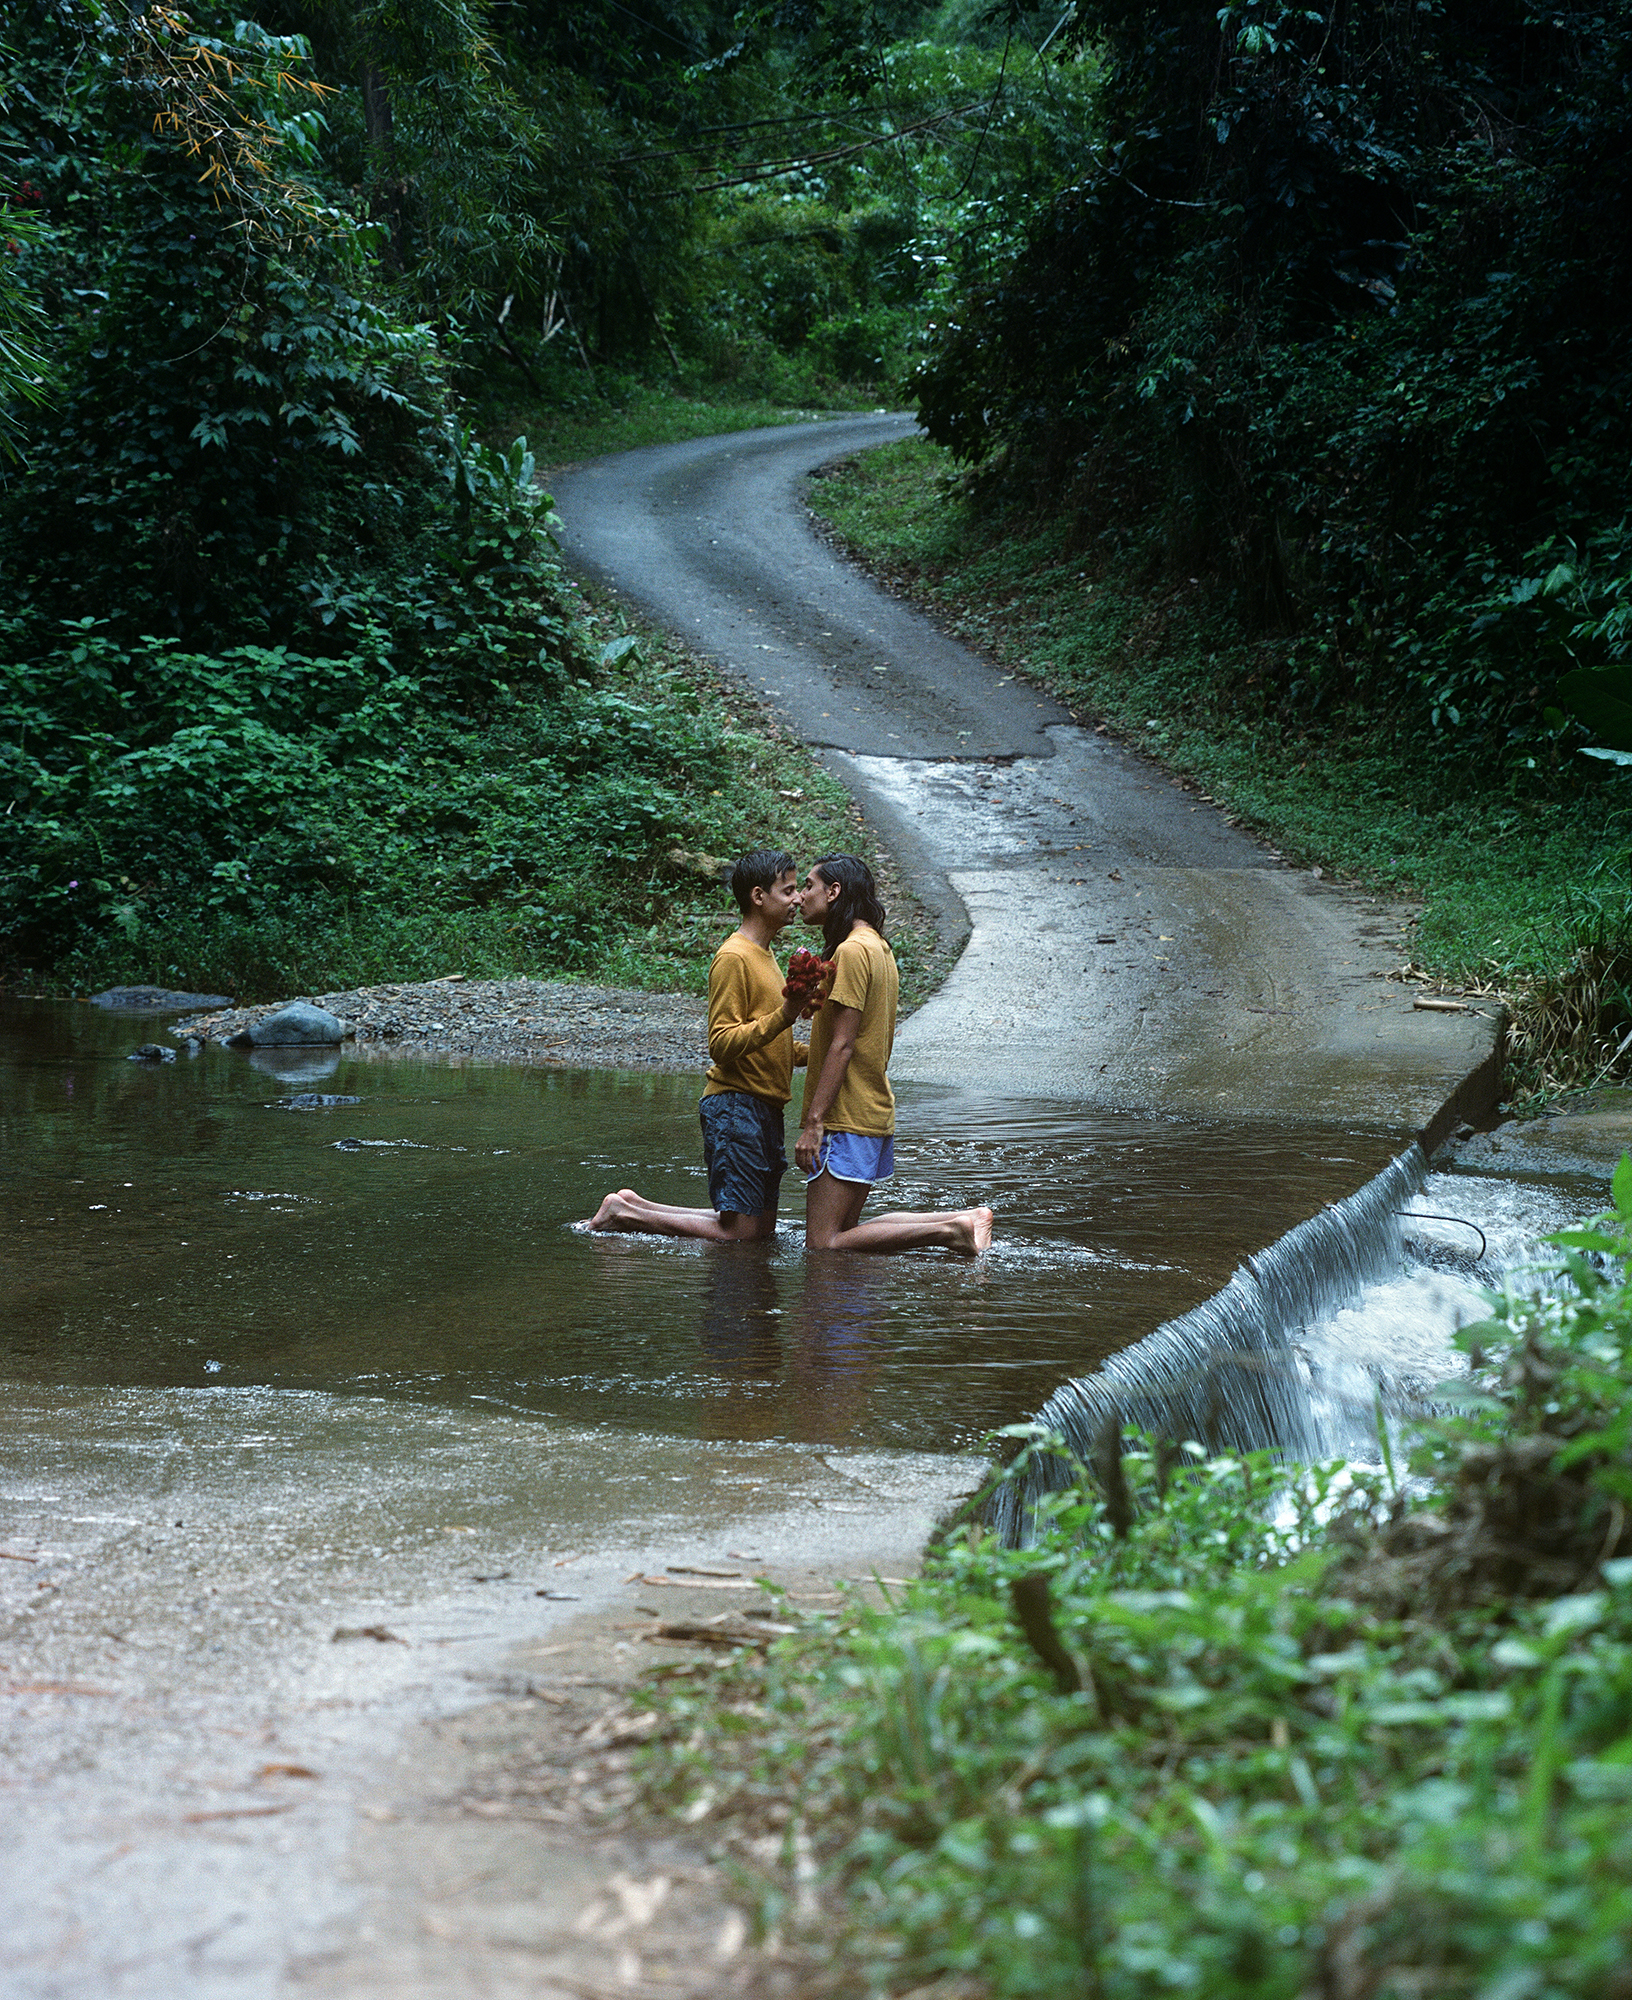 A photo of two male presenting lovers kneeling in small stream is shown. The two are facing each other, as if caught in an intimate moment.